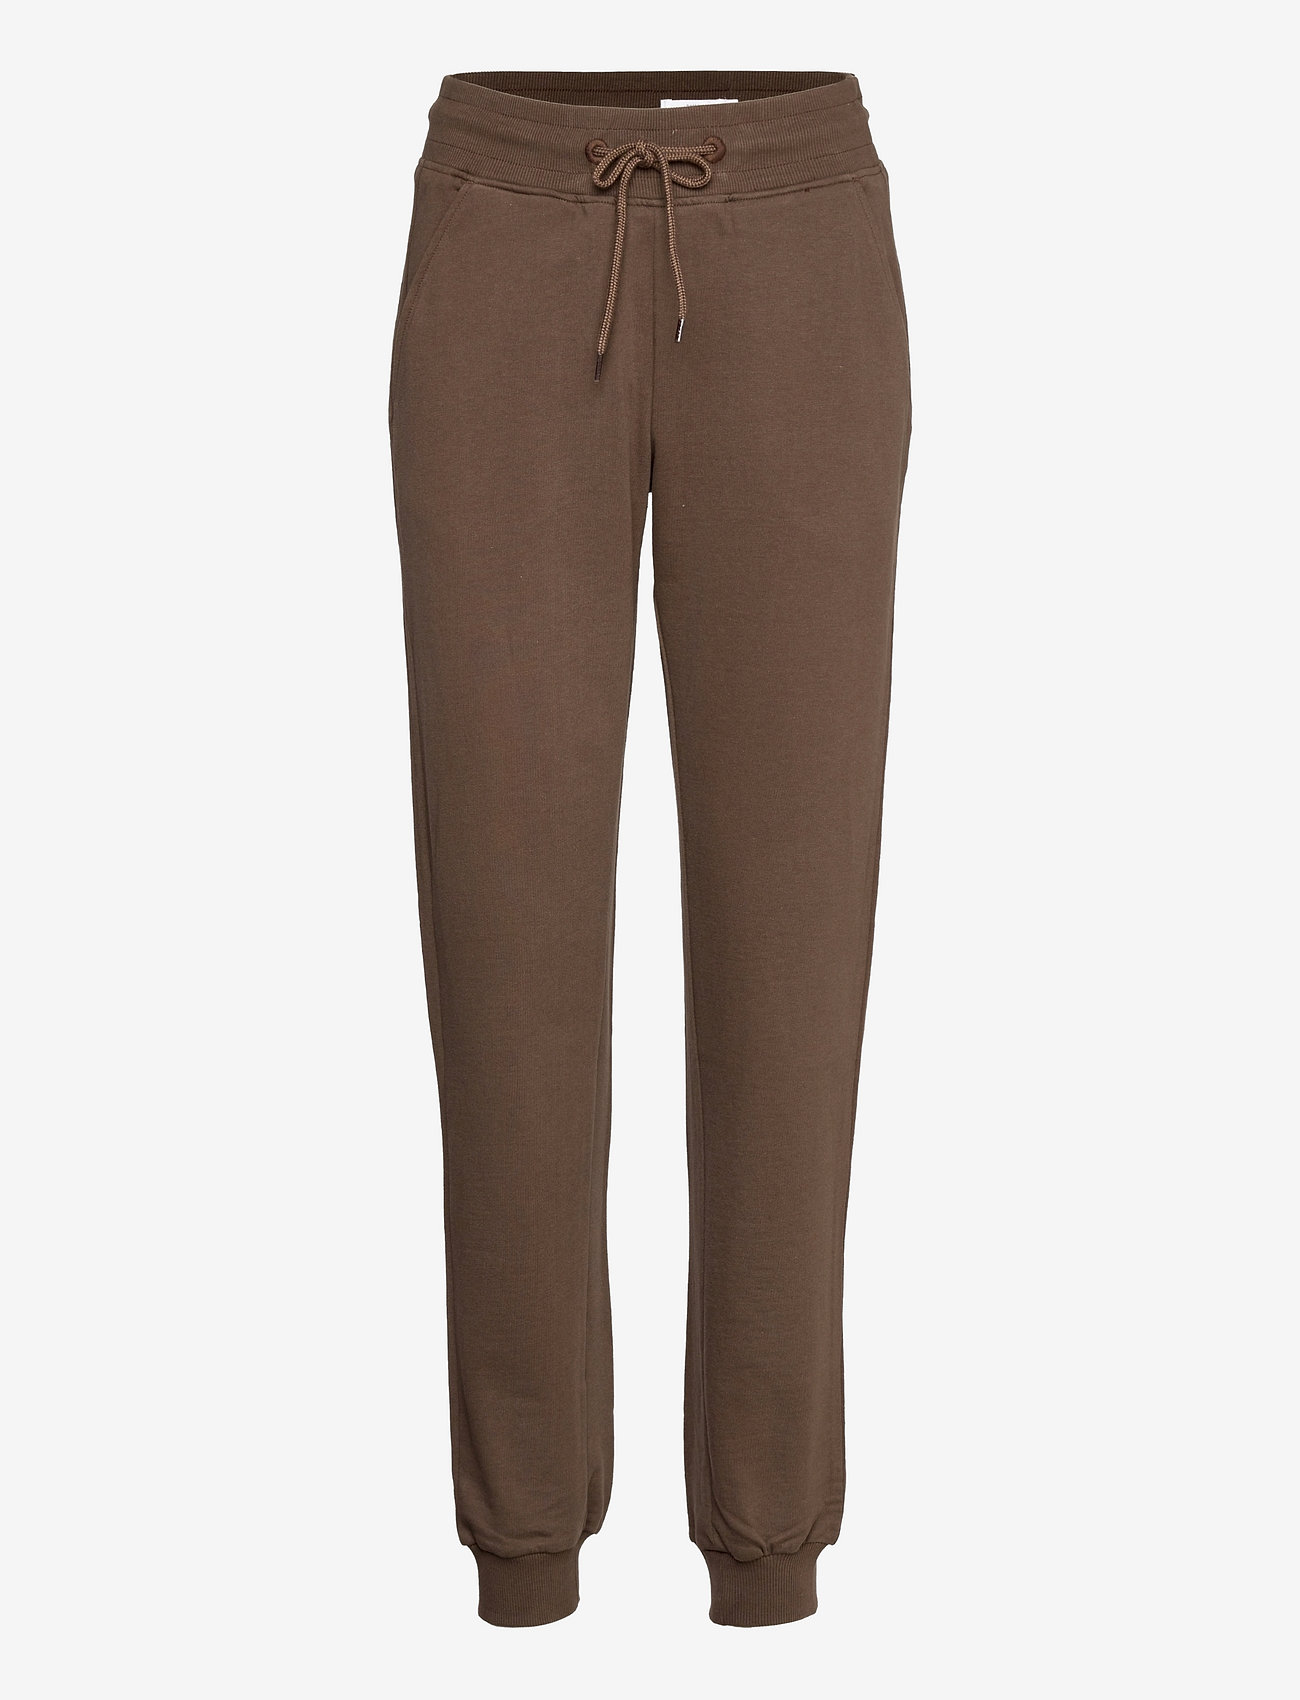 Bread & Boxers - Lounge pant - dames - earth brown - 0